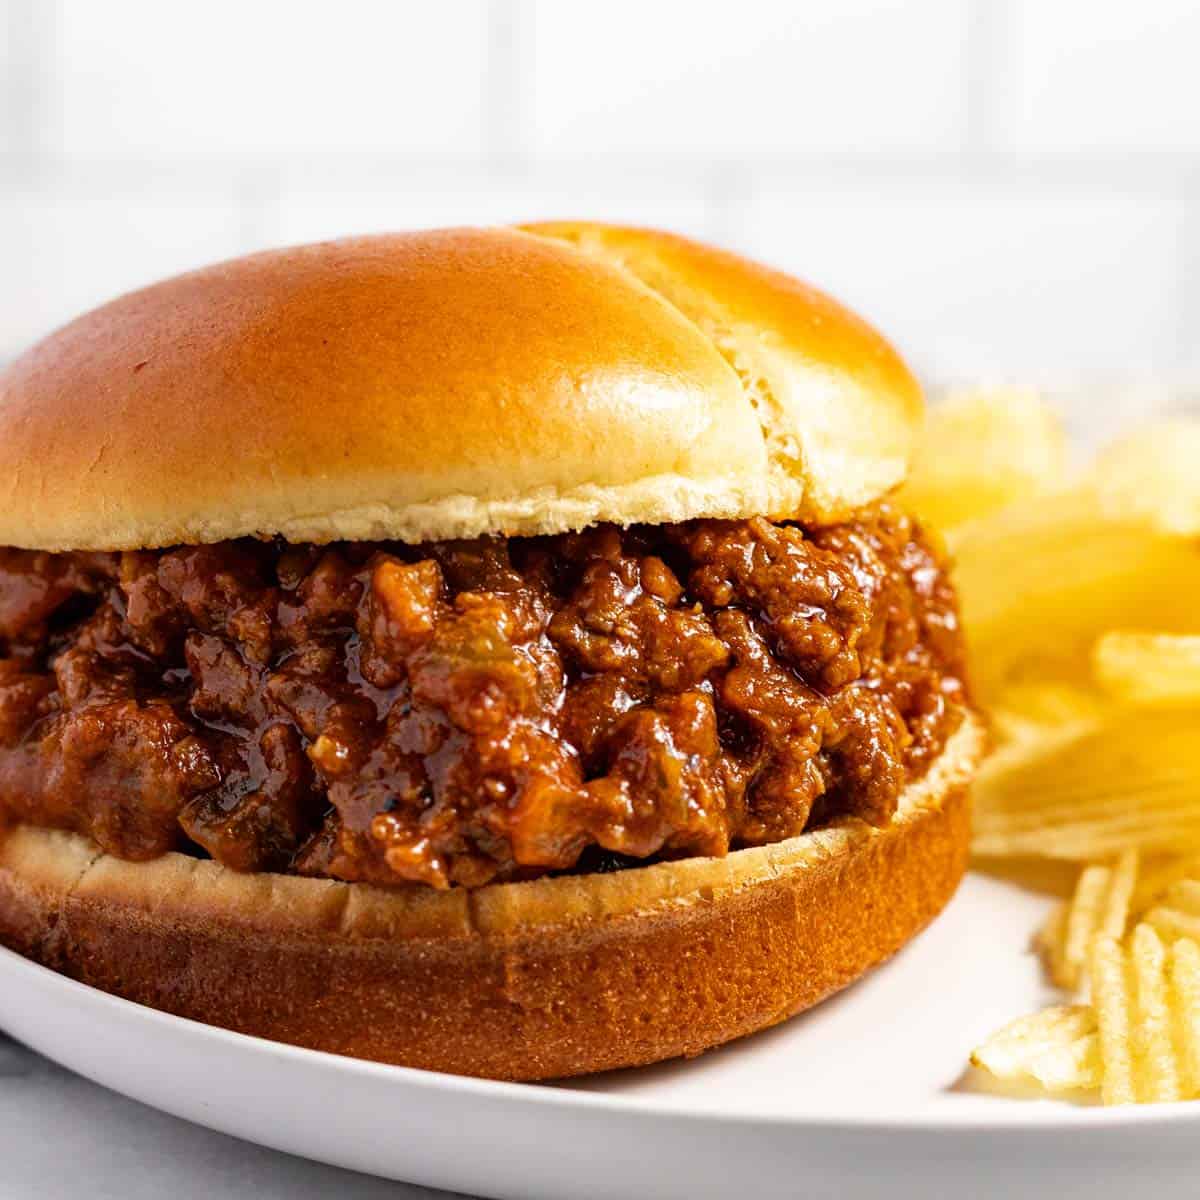 https://midwestfoodieblog.com/wp-content/uploads/2023/12/sloppy-joes-feature-image-1.jpg